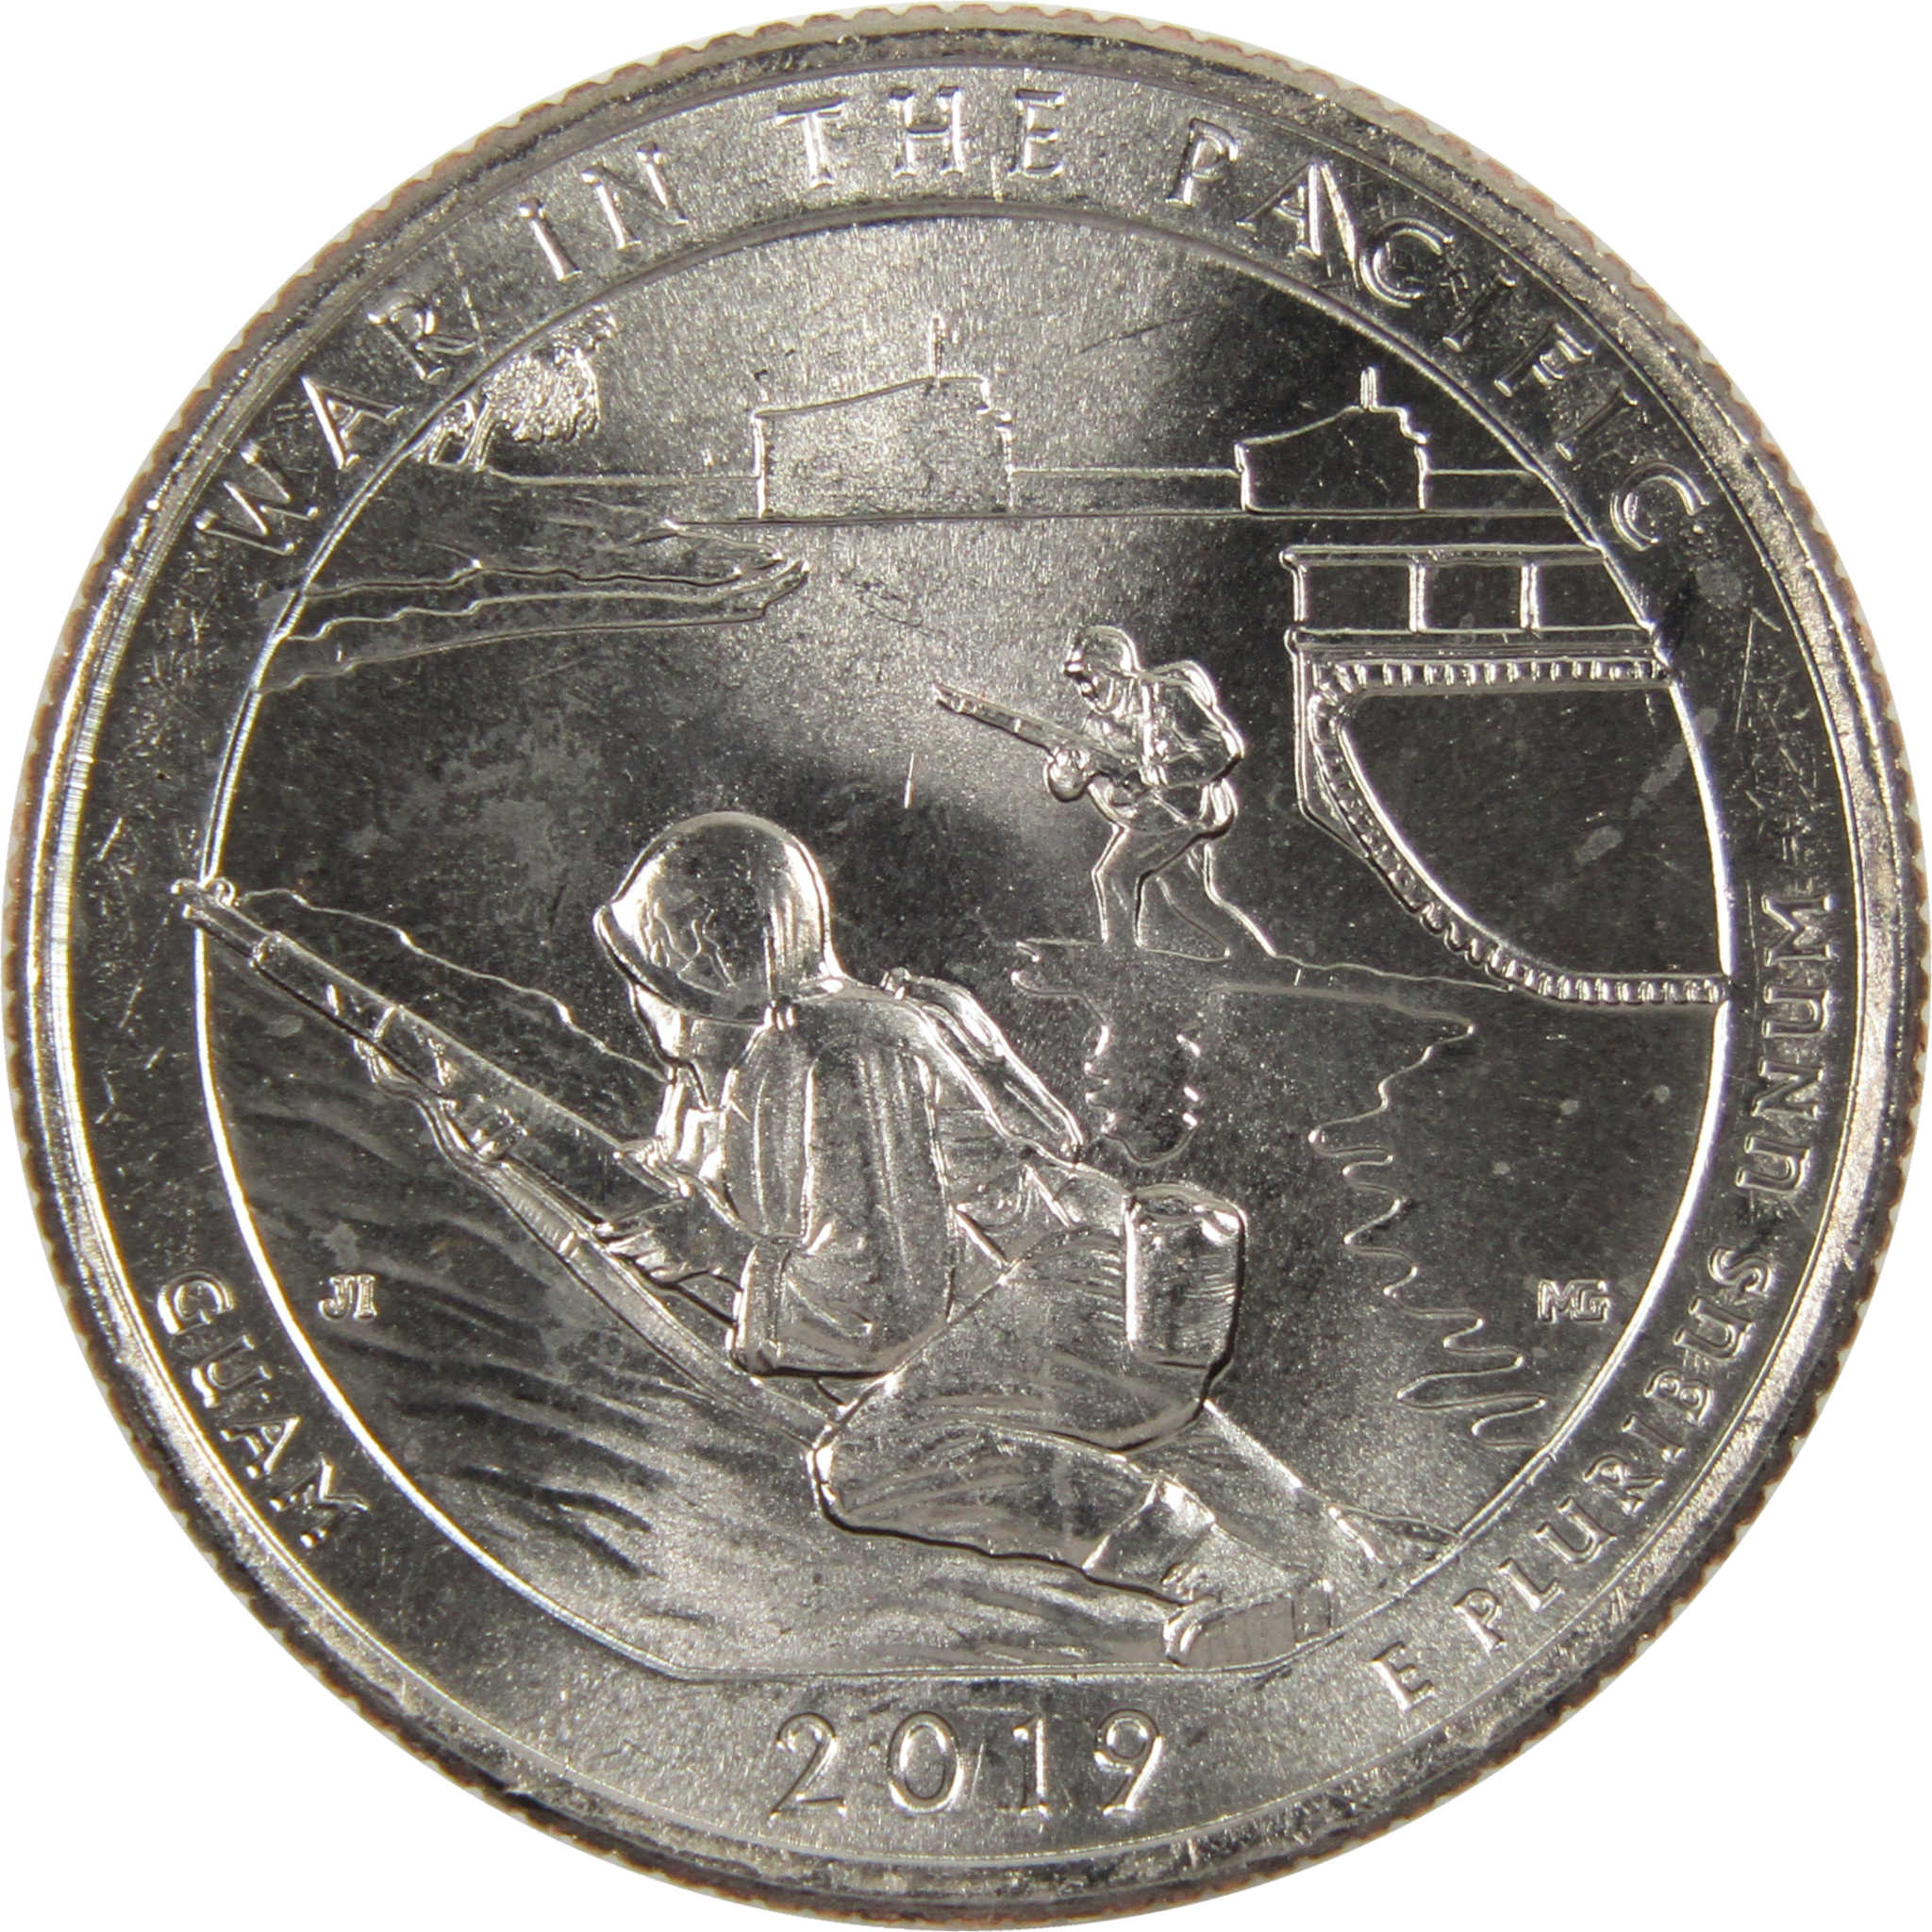 2019 P War in the Pacific NHP National Park Quarter Uncirculated Clad